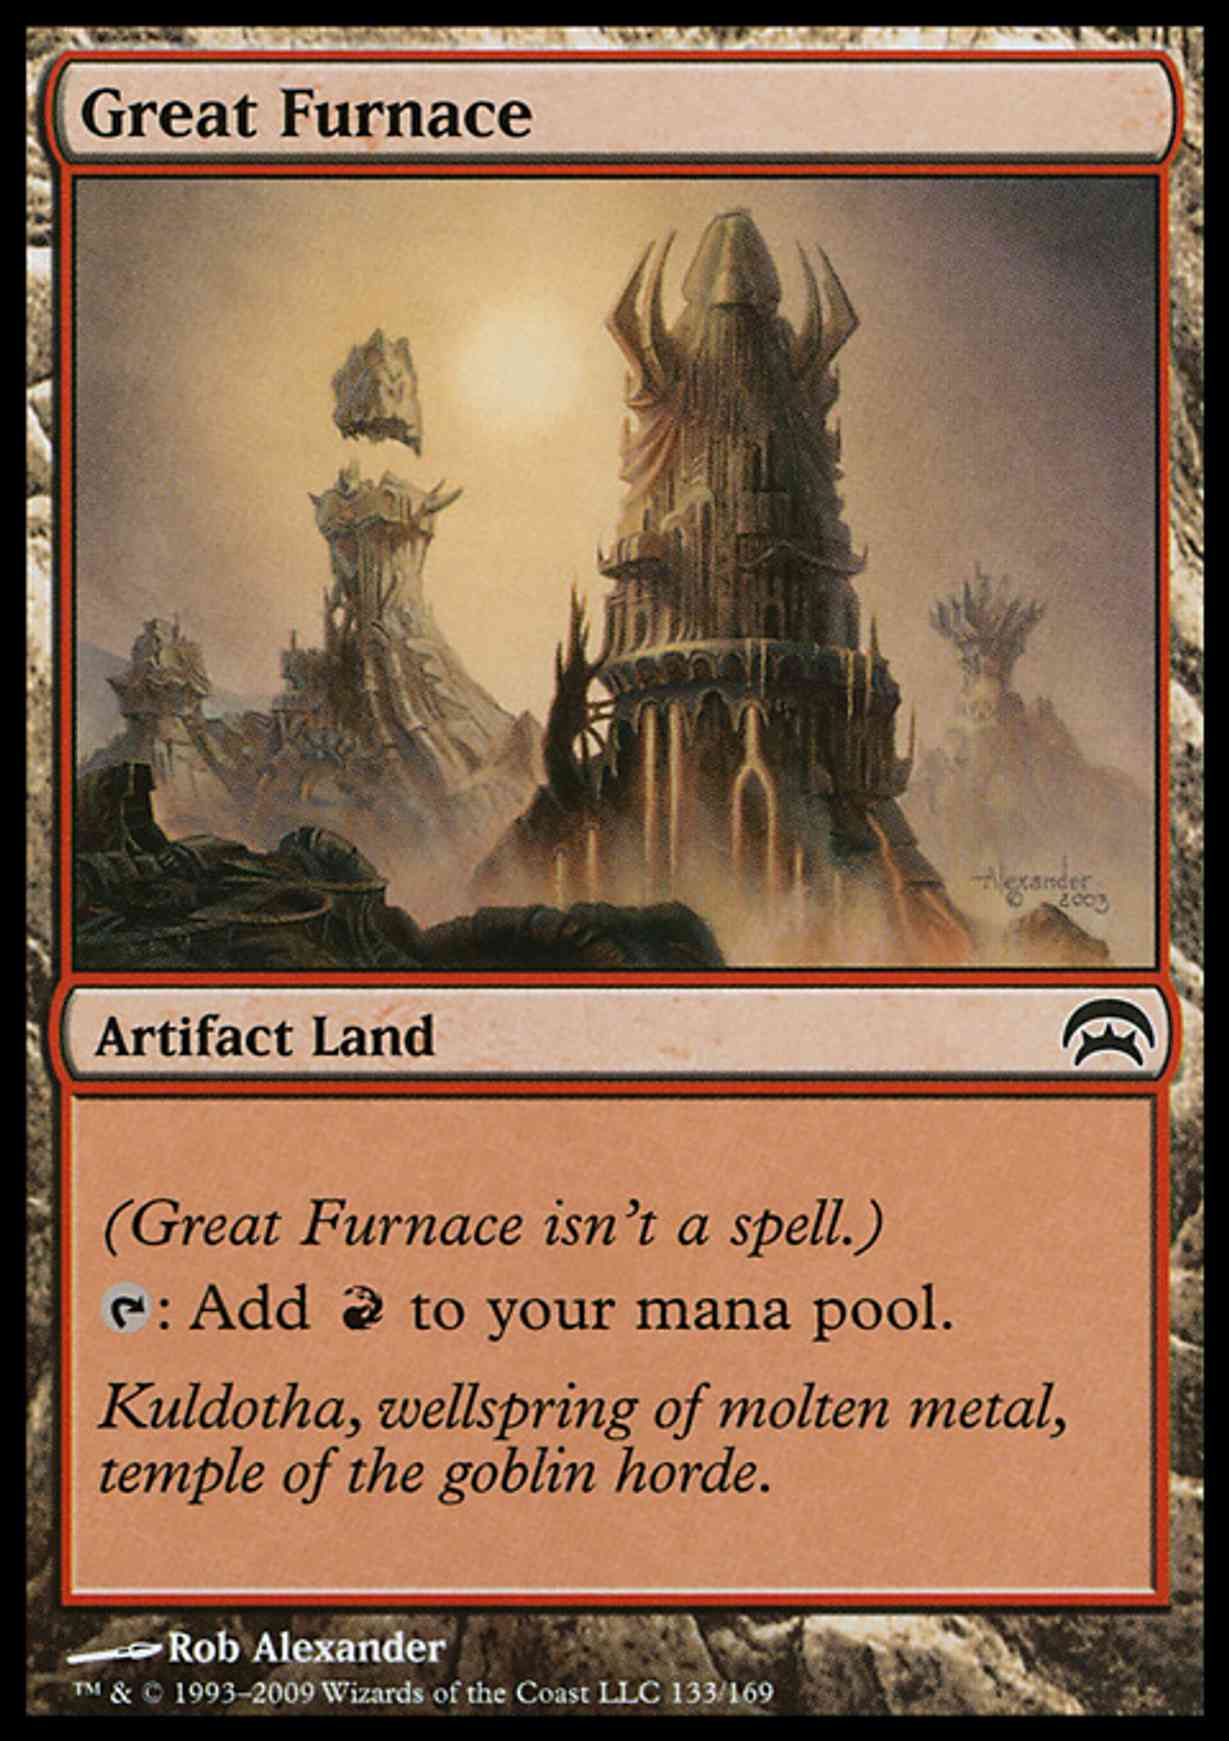 Great Furnace magic card front